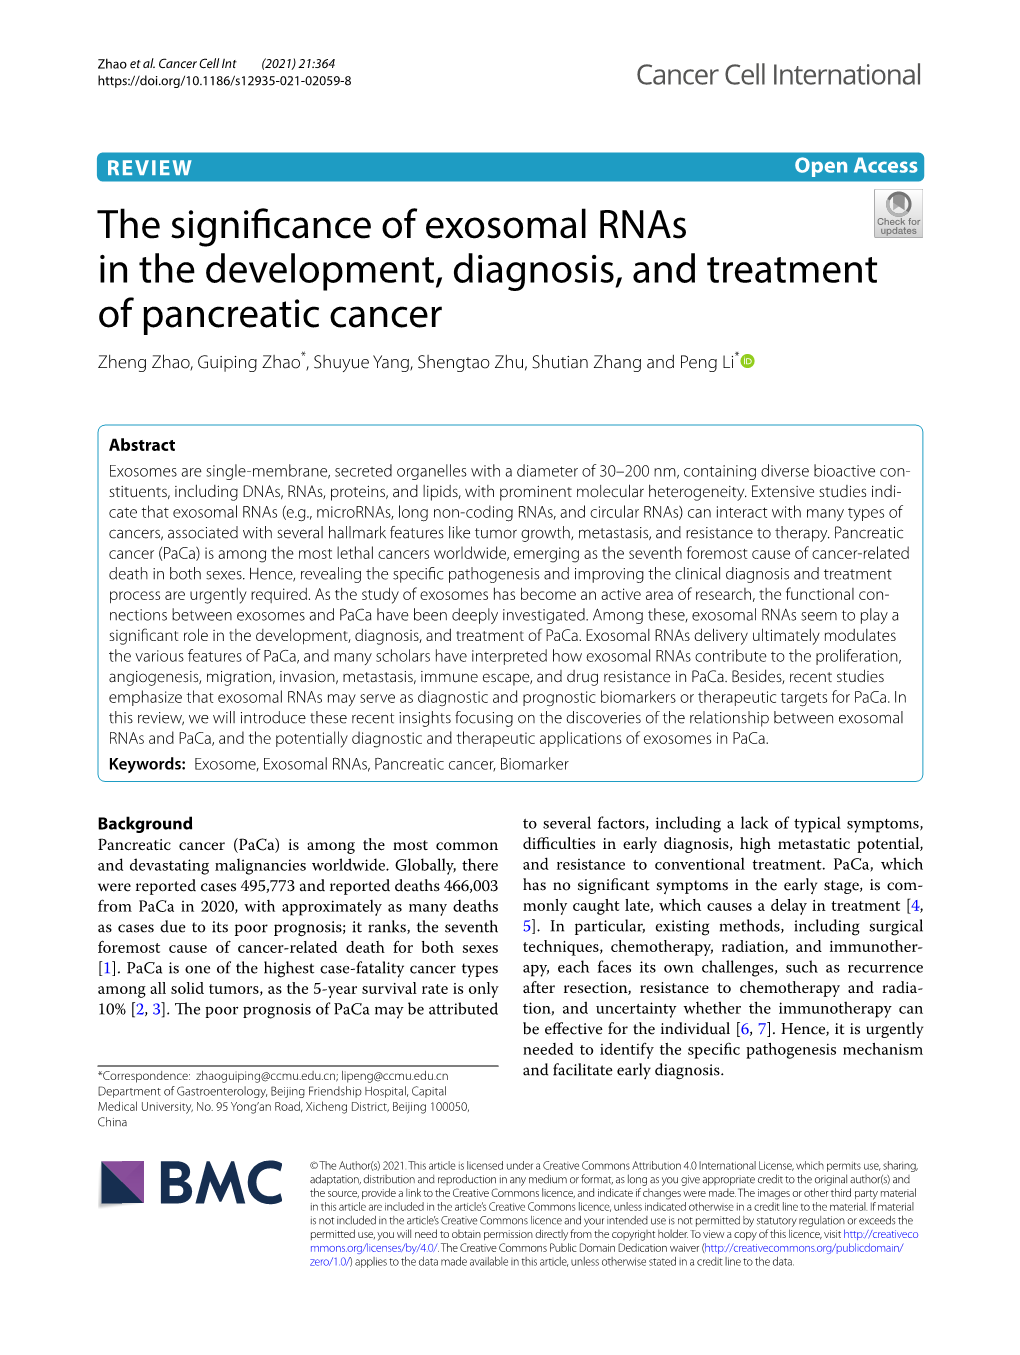 The Significance of Exosomal Rnas in the Development, Diagnosis, And